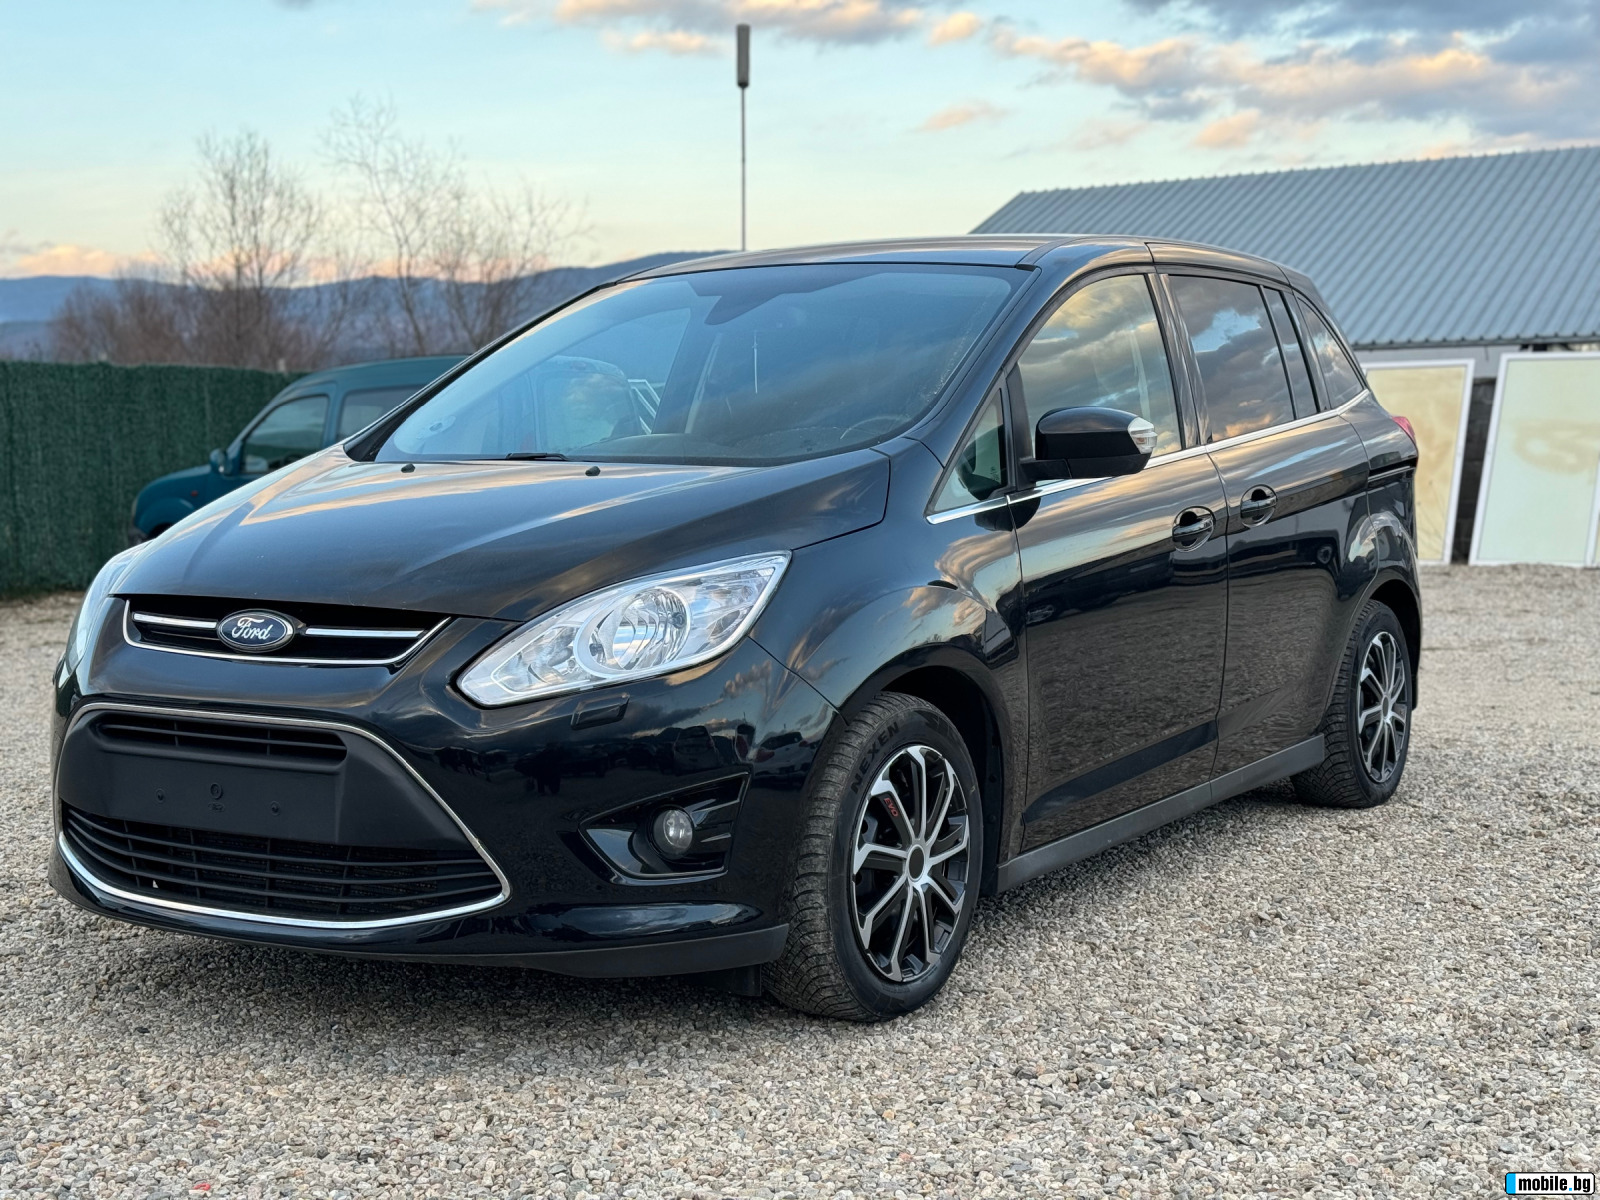 Ford Grand C-Max 2.0tdci Automatic 140hp | Mobile.bg   1